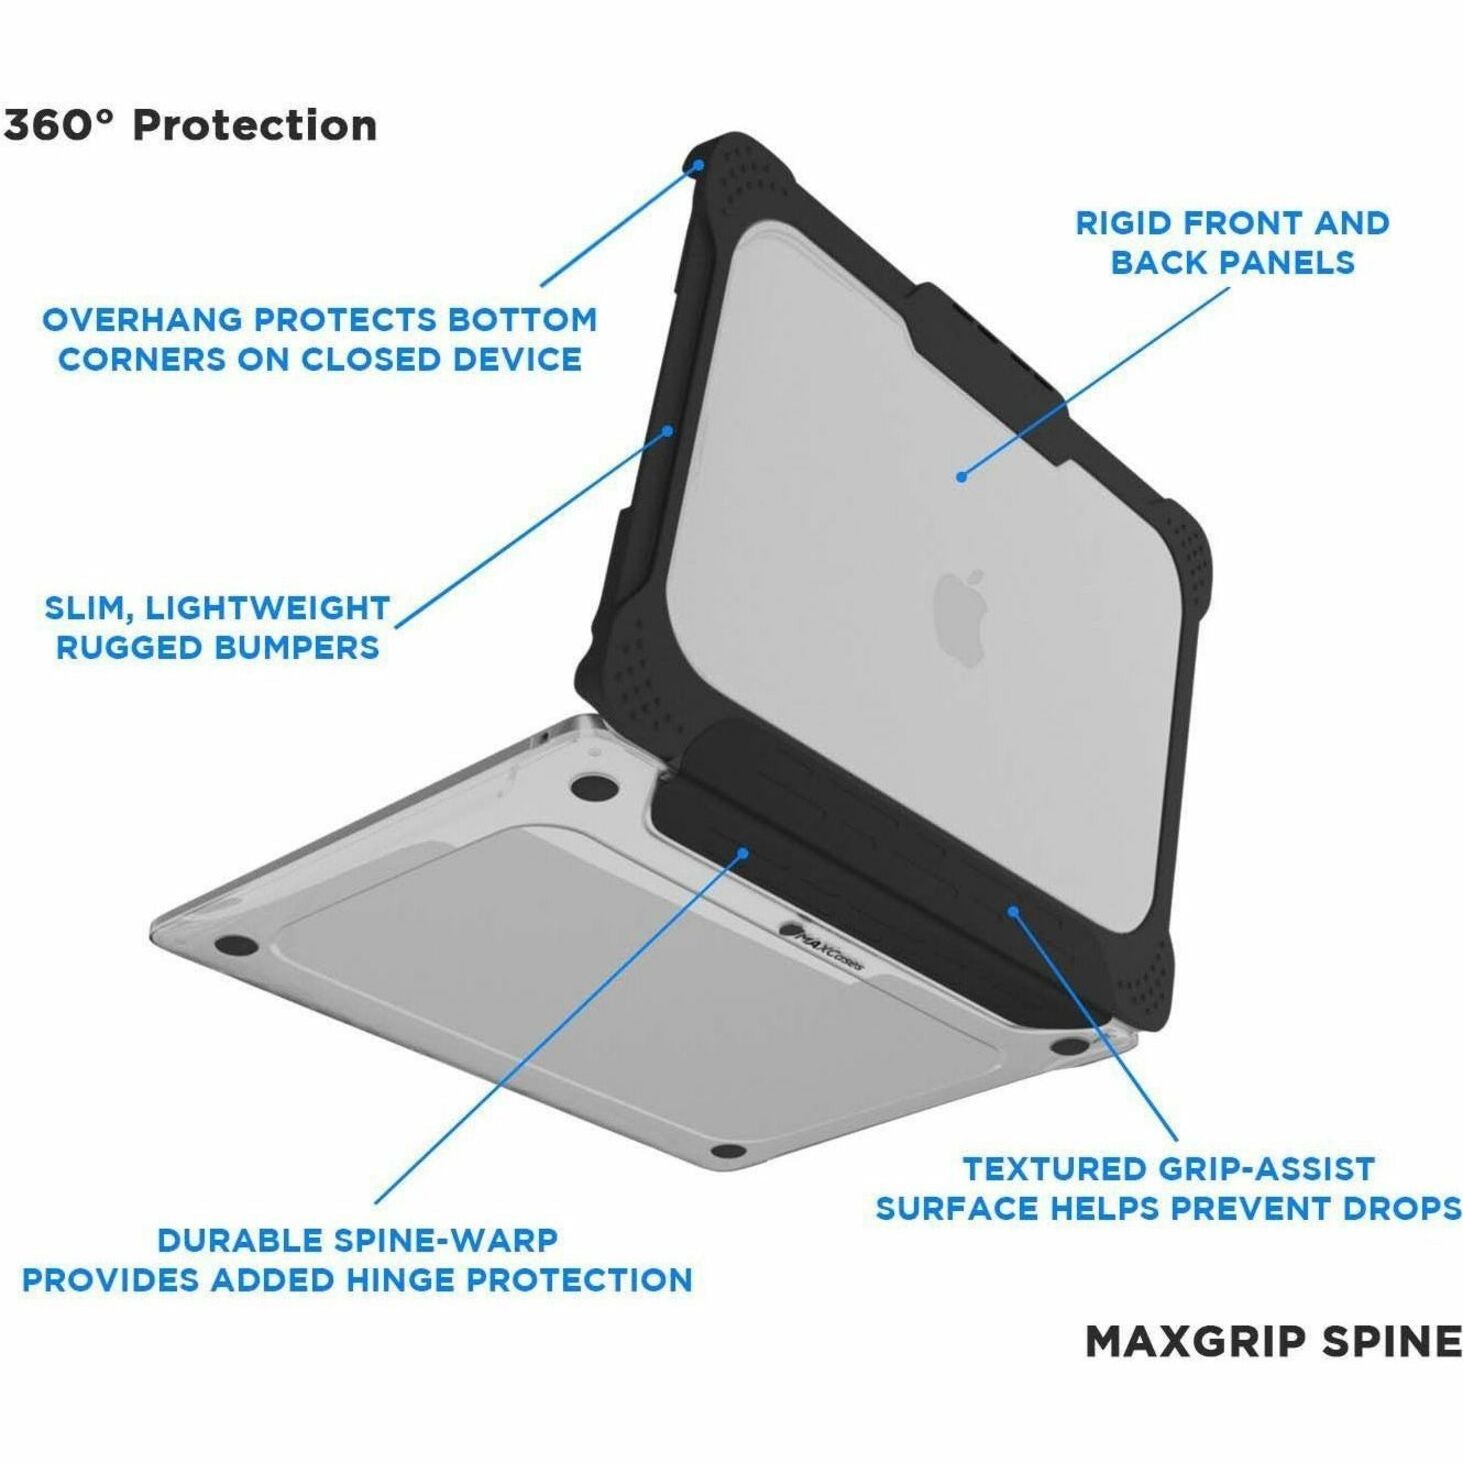 MAXCases AP-ESL-MBA-13M2-BCLR Extreme Shell-L for MacBook Air 13.6" (2022 - M2 Chip), Rugged, Impact Absorbing, Scratch Resistant, Black/Clear